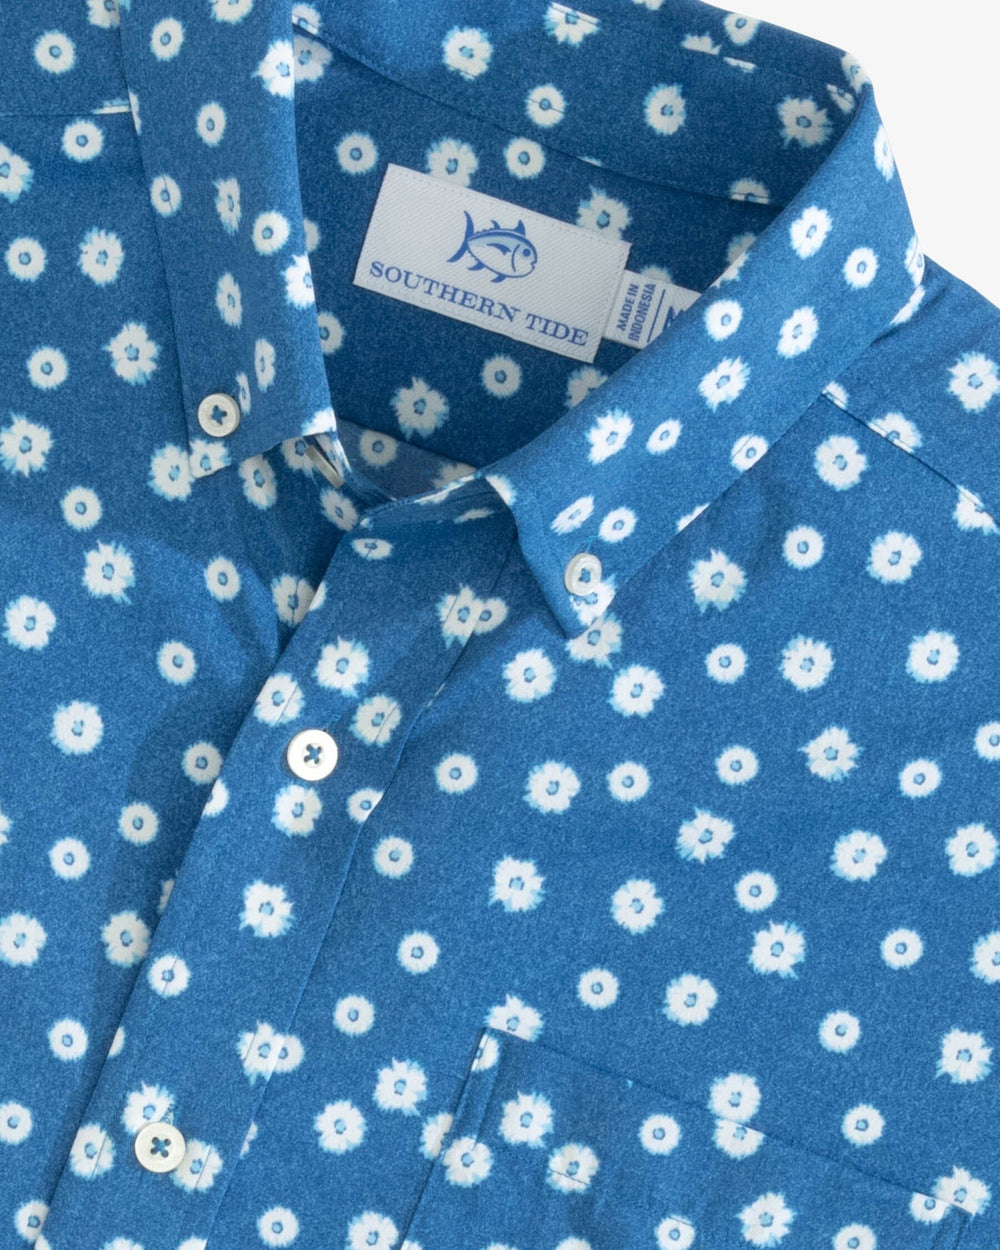 The detail view of the Southern Tide Heather Poppin Poppies Intercoastal Short Sleeve Button Down Shirt by Southern Tide - Heather Atlantic Blue